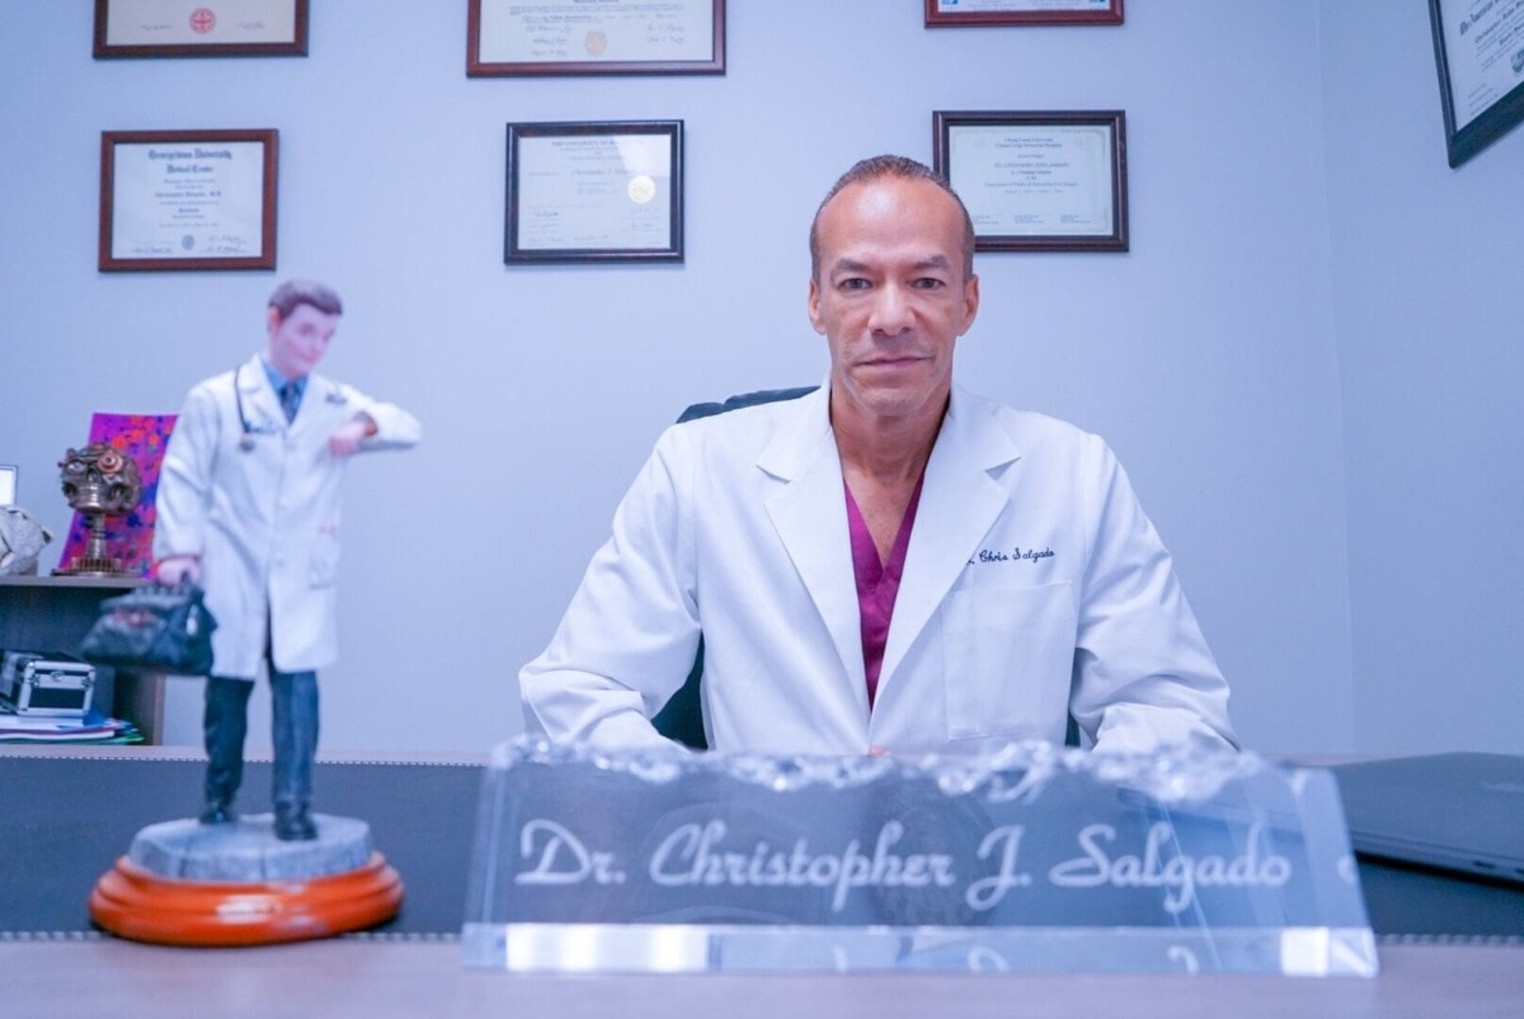 Disgraced Gender Affirming Surgeon Goes Through His Own Transformation